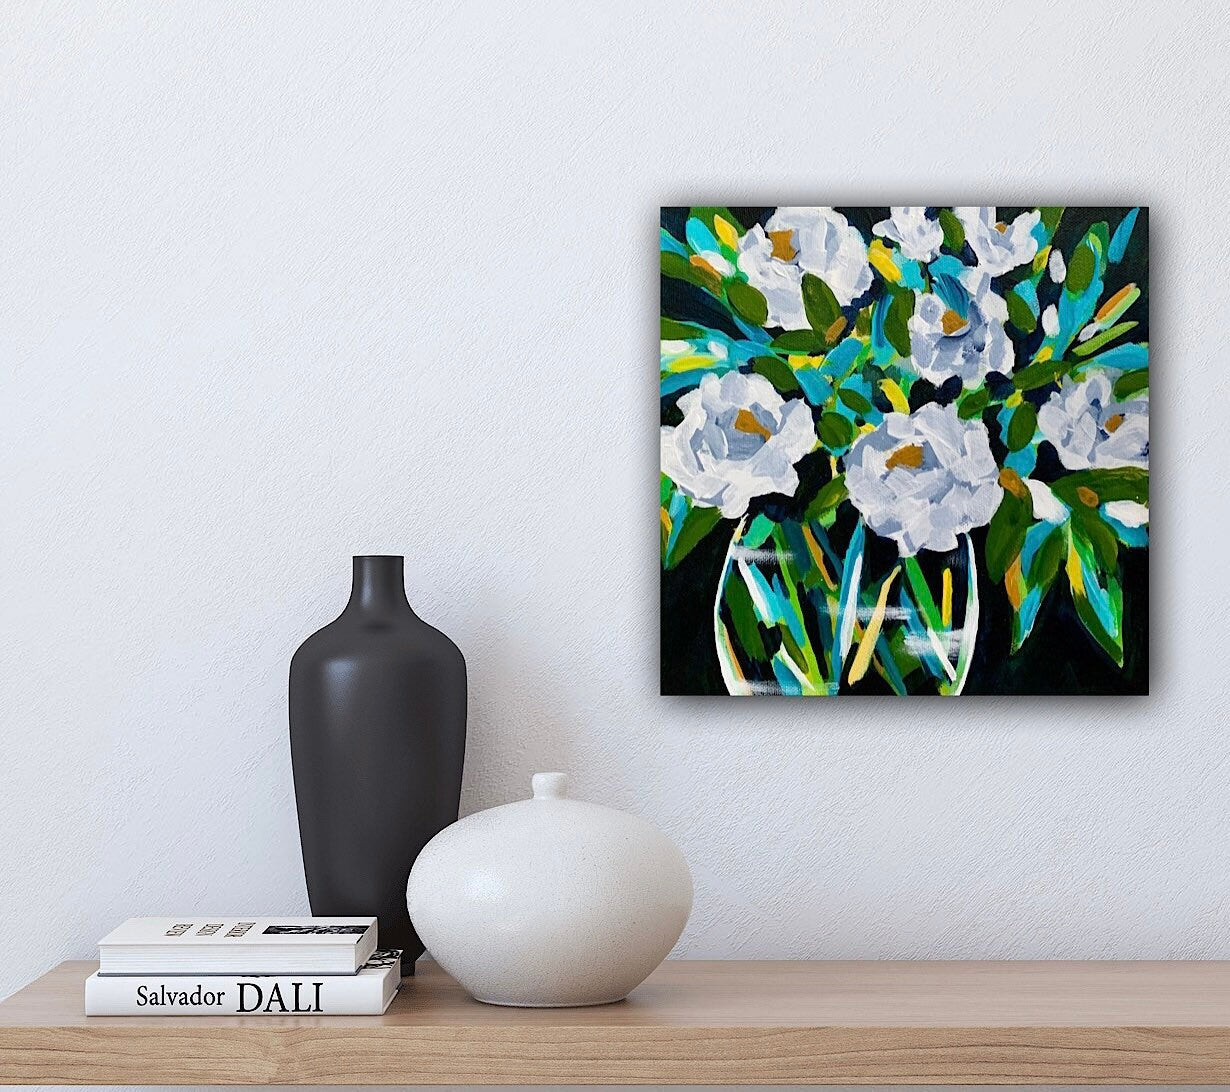 White flowers in vase classical painting Garden decor Eye catching color botanical design Nature home accent Feminine decor